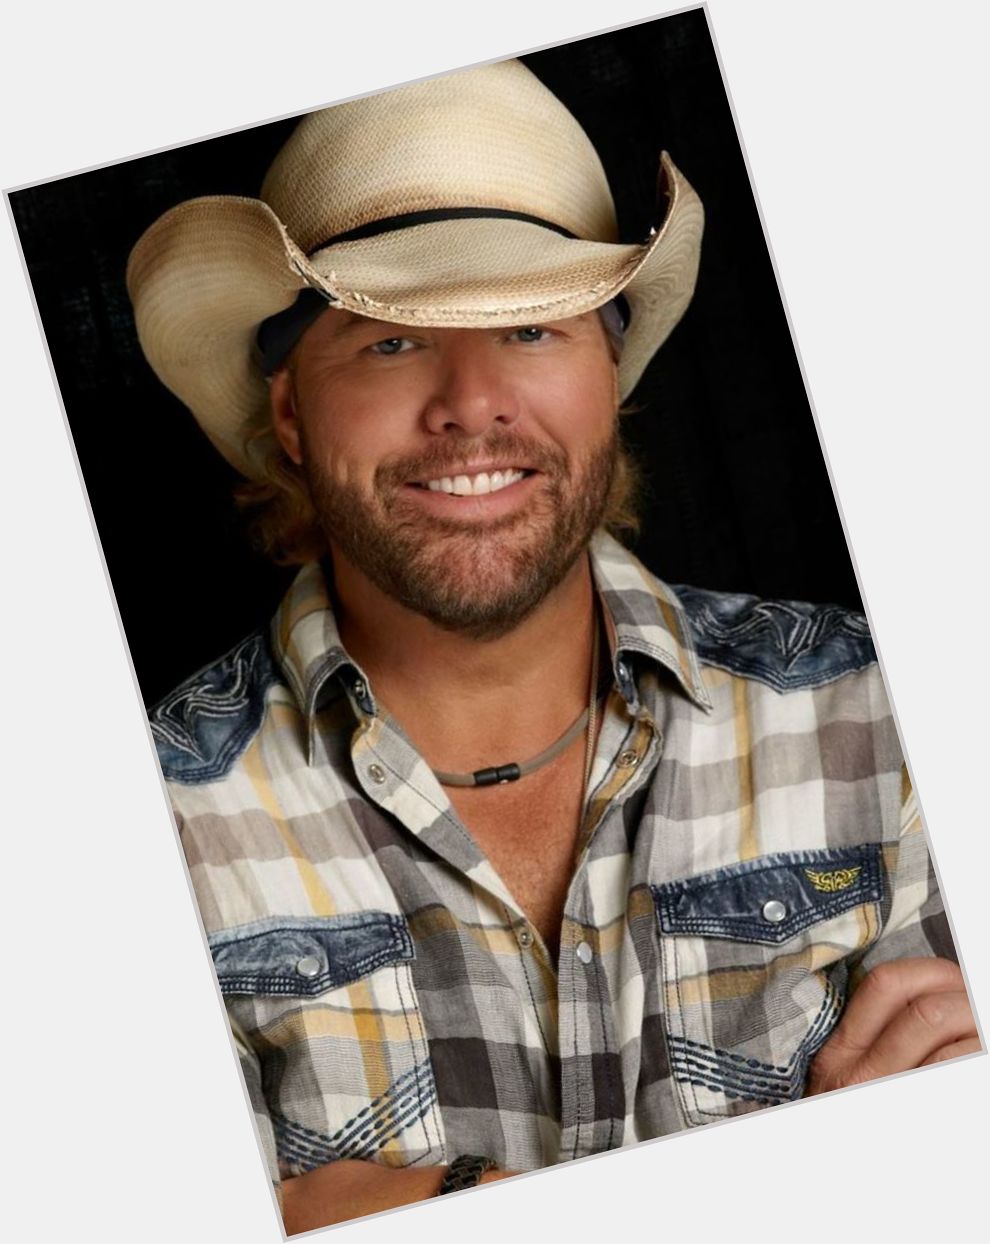   Happy 58th Birthday to Toby Keith  